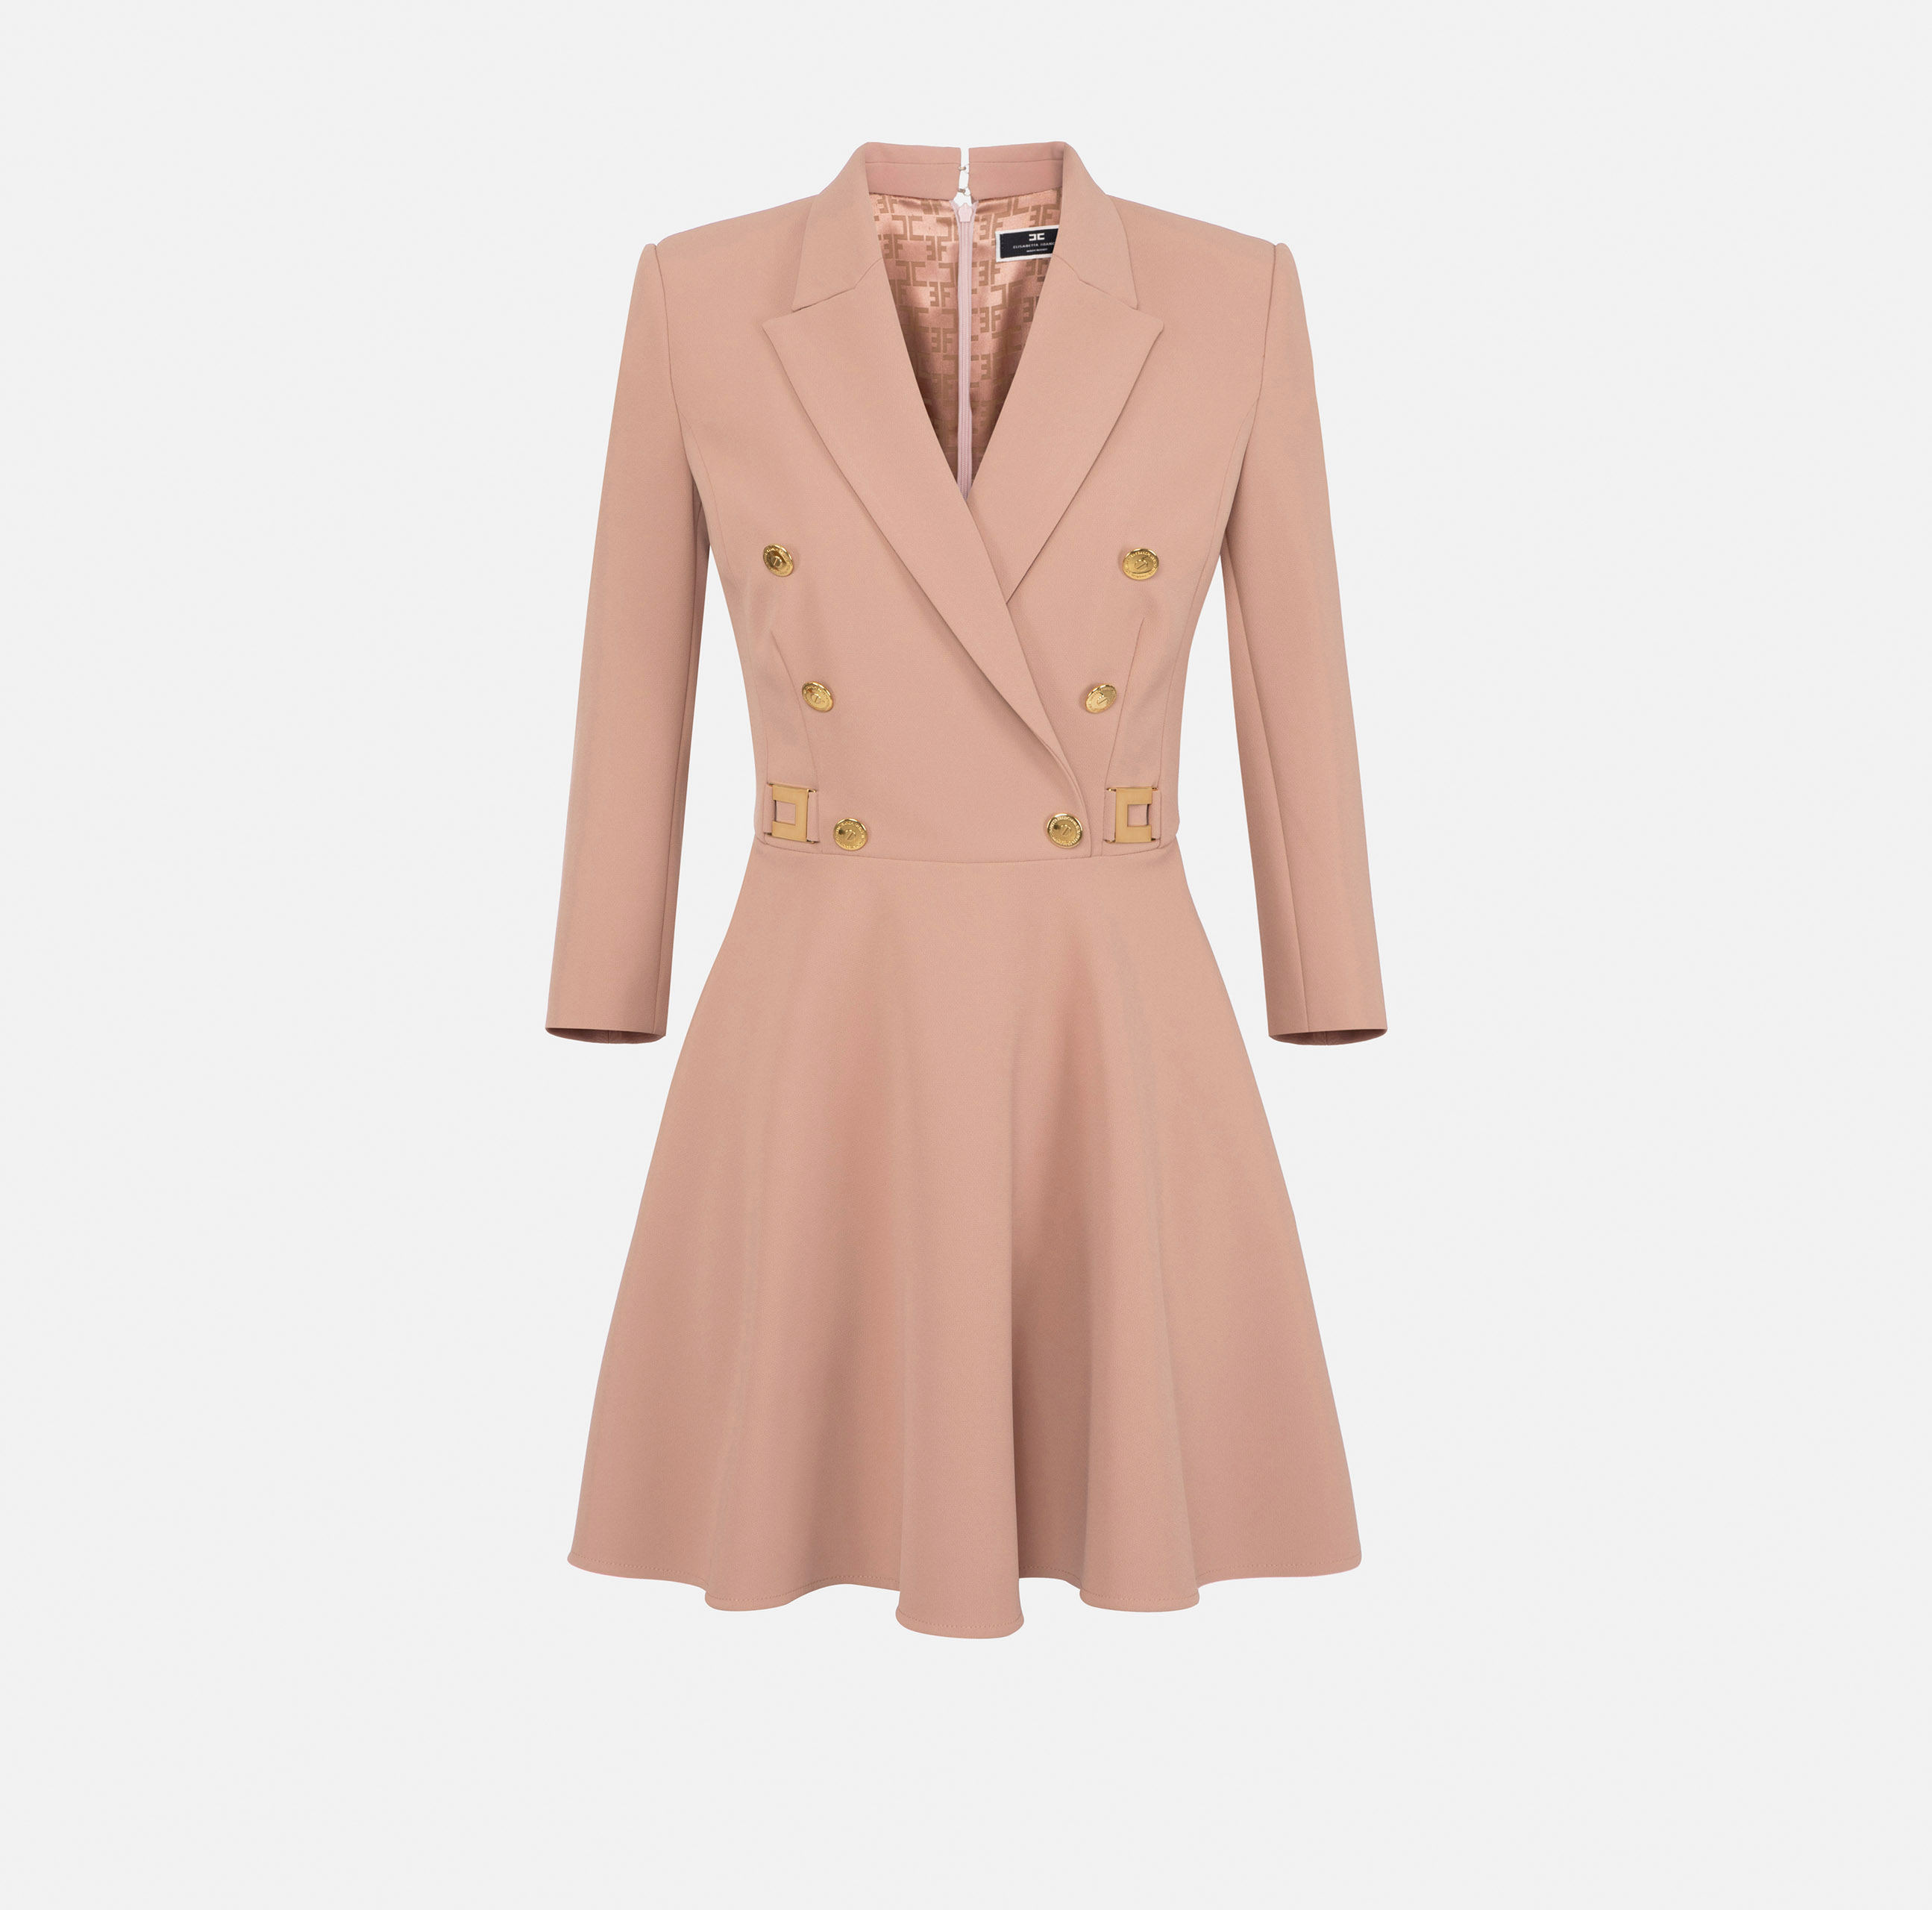 Coat dress in double layer crêpe fabric with gored skirt - ABBIGLIAMENTO - Elisabetta Franchi